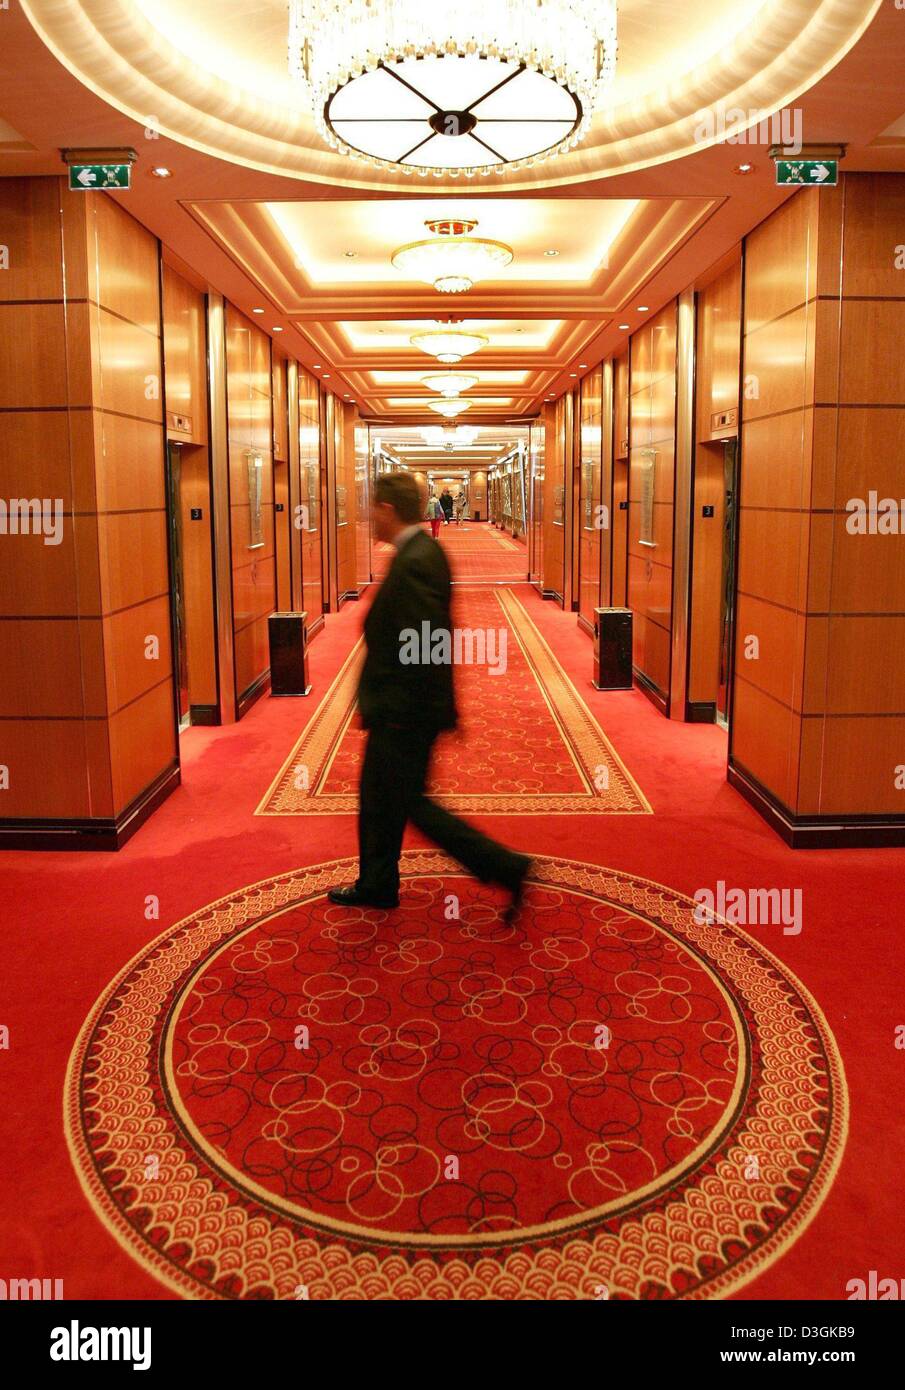 (dpa) - A passanger walks along a corridor on the luxury cruise liner 'Queen Mary 2' which is docking at the pier of the harbour in Hamburg, Germany, 19 July 2004. The 'Queen Mary 2', which was built at a cost of 800 million dollars, is the flagship of the British Cunard shipowning company. The vessel is 345 metres long, the length of the Eiffel Tower, and accommodates up to 2620 p Stock Photo